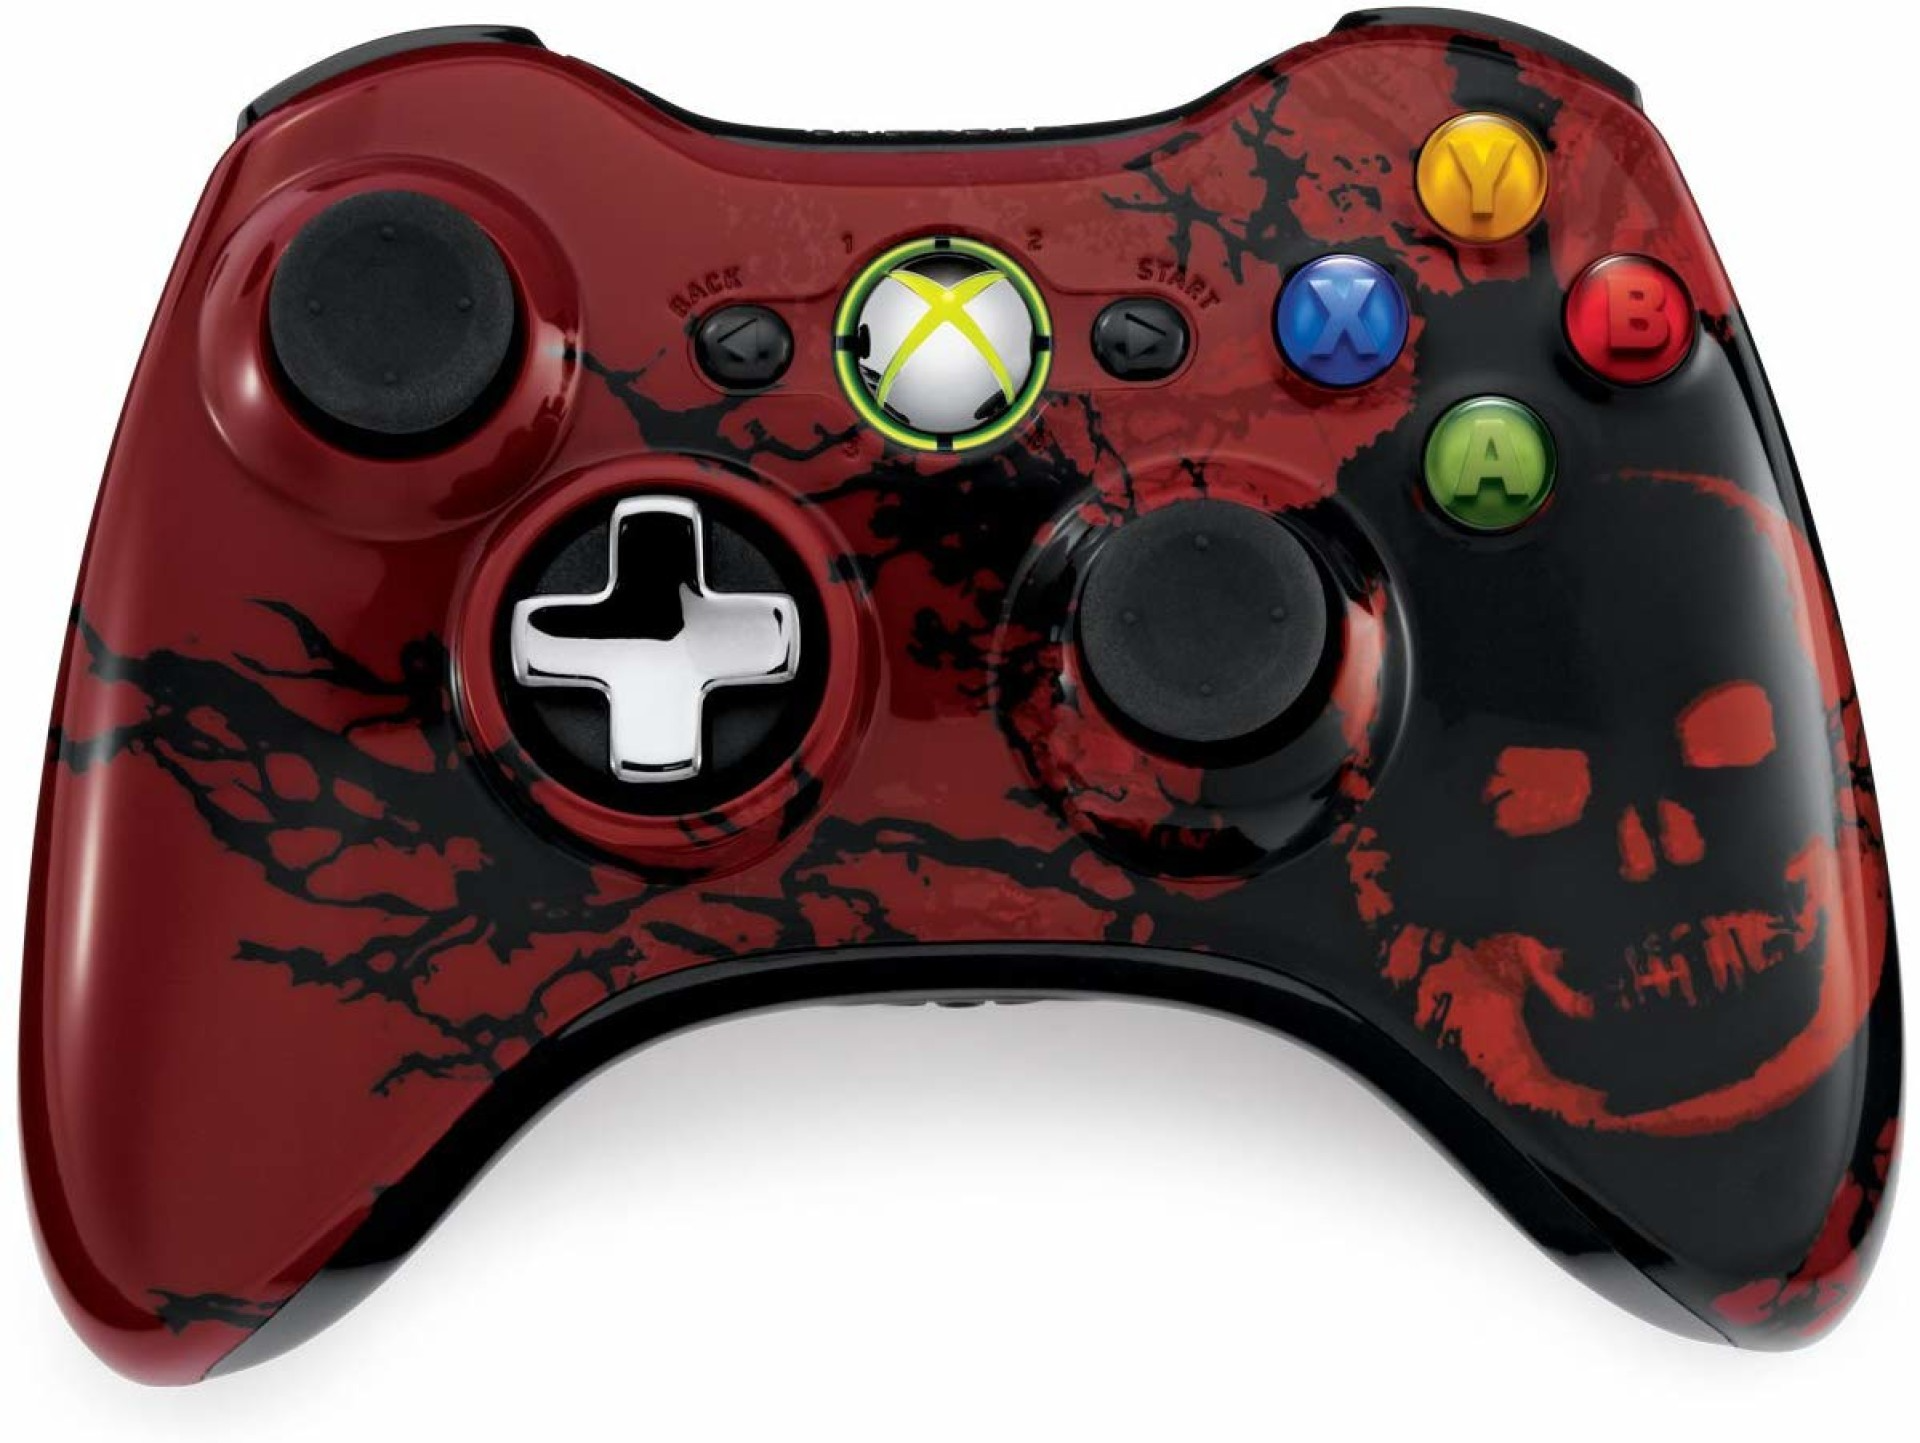 Microsoft Xbox 360 Gears of War Limited Edition Wireless Controller